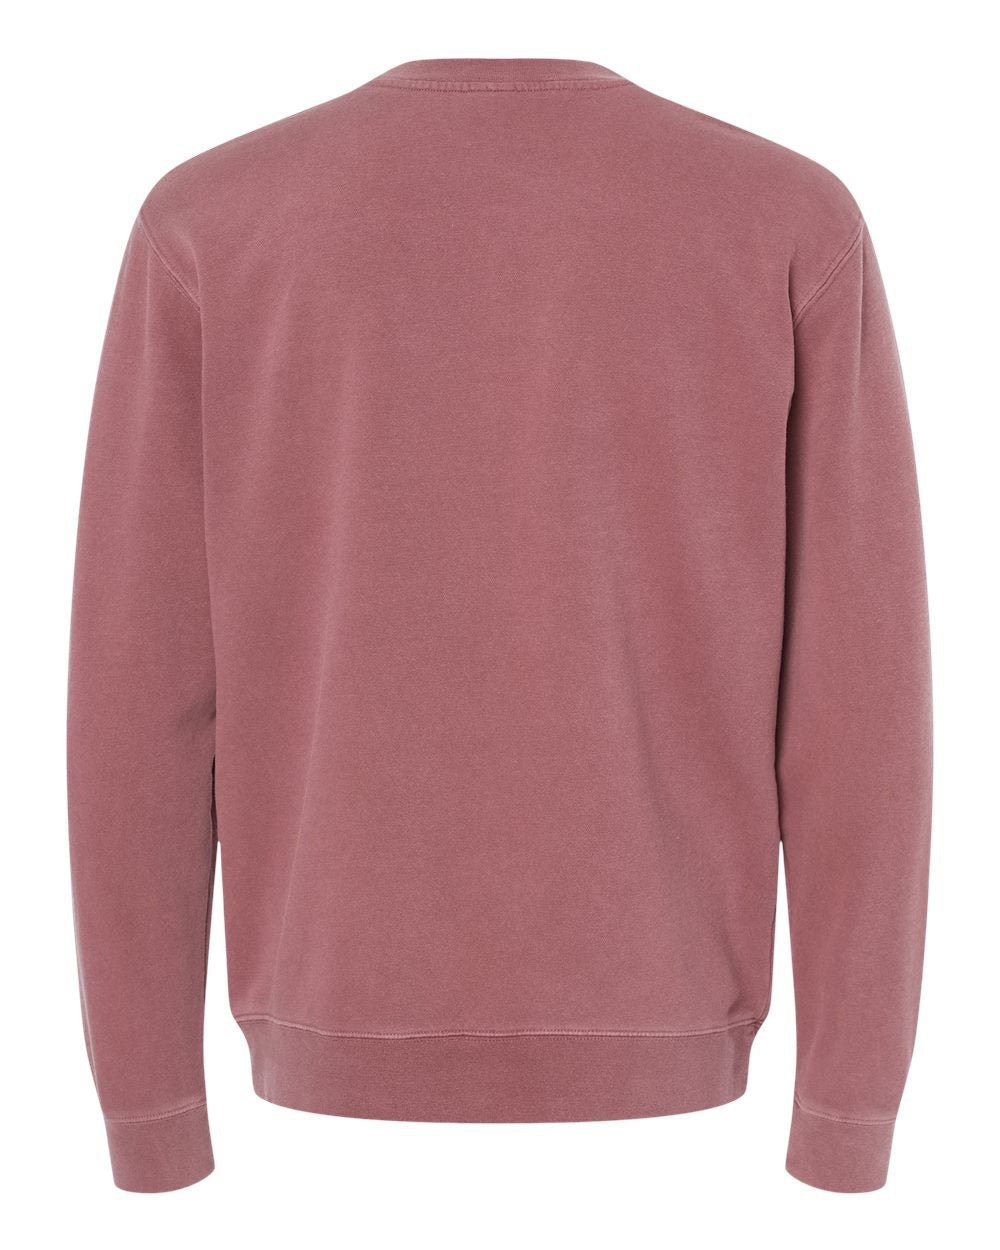 Independent Trading Co. Unisex Midweight Pigment-Dyed Crewneck Sweatshirt PRM3500 #color_Pigment Maroon